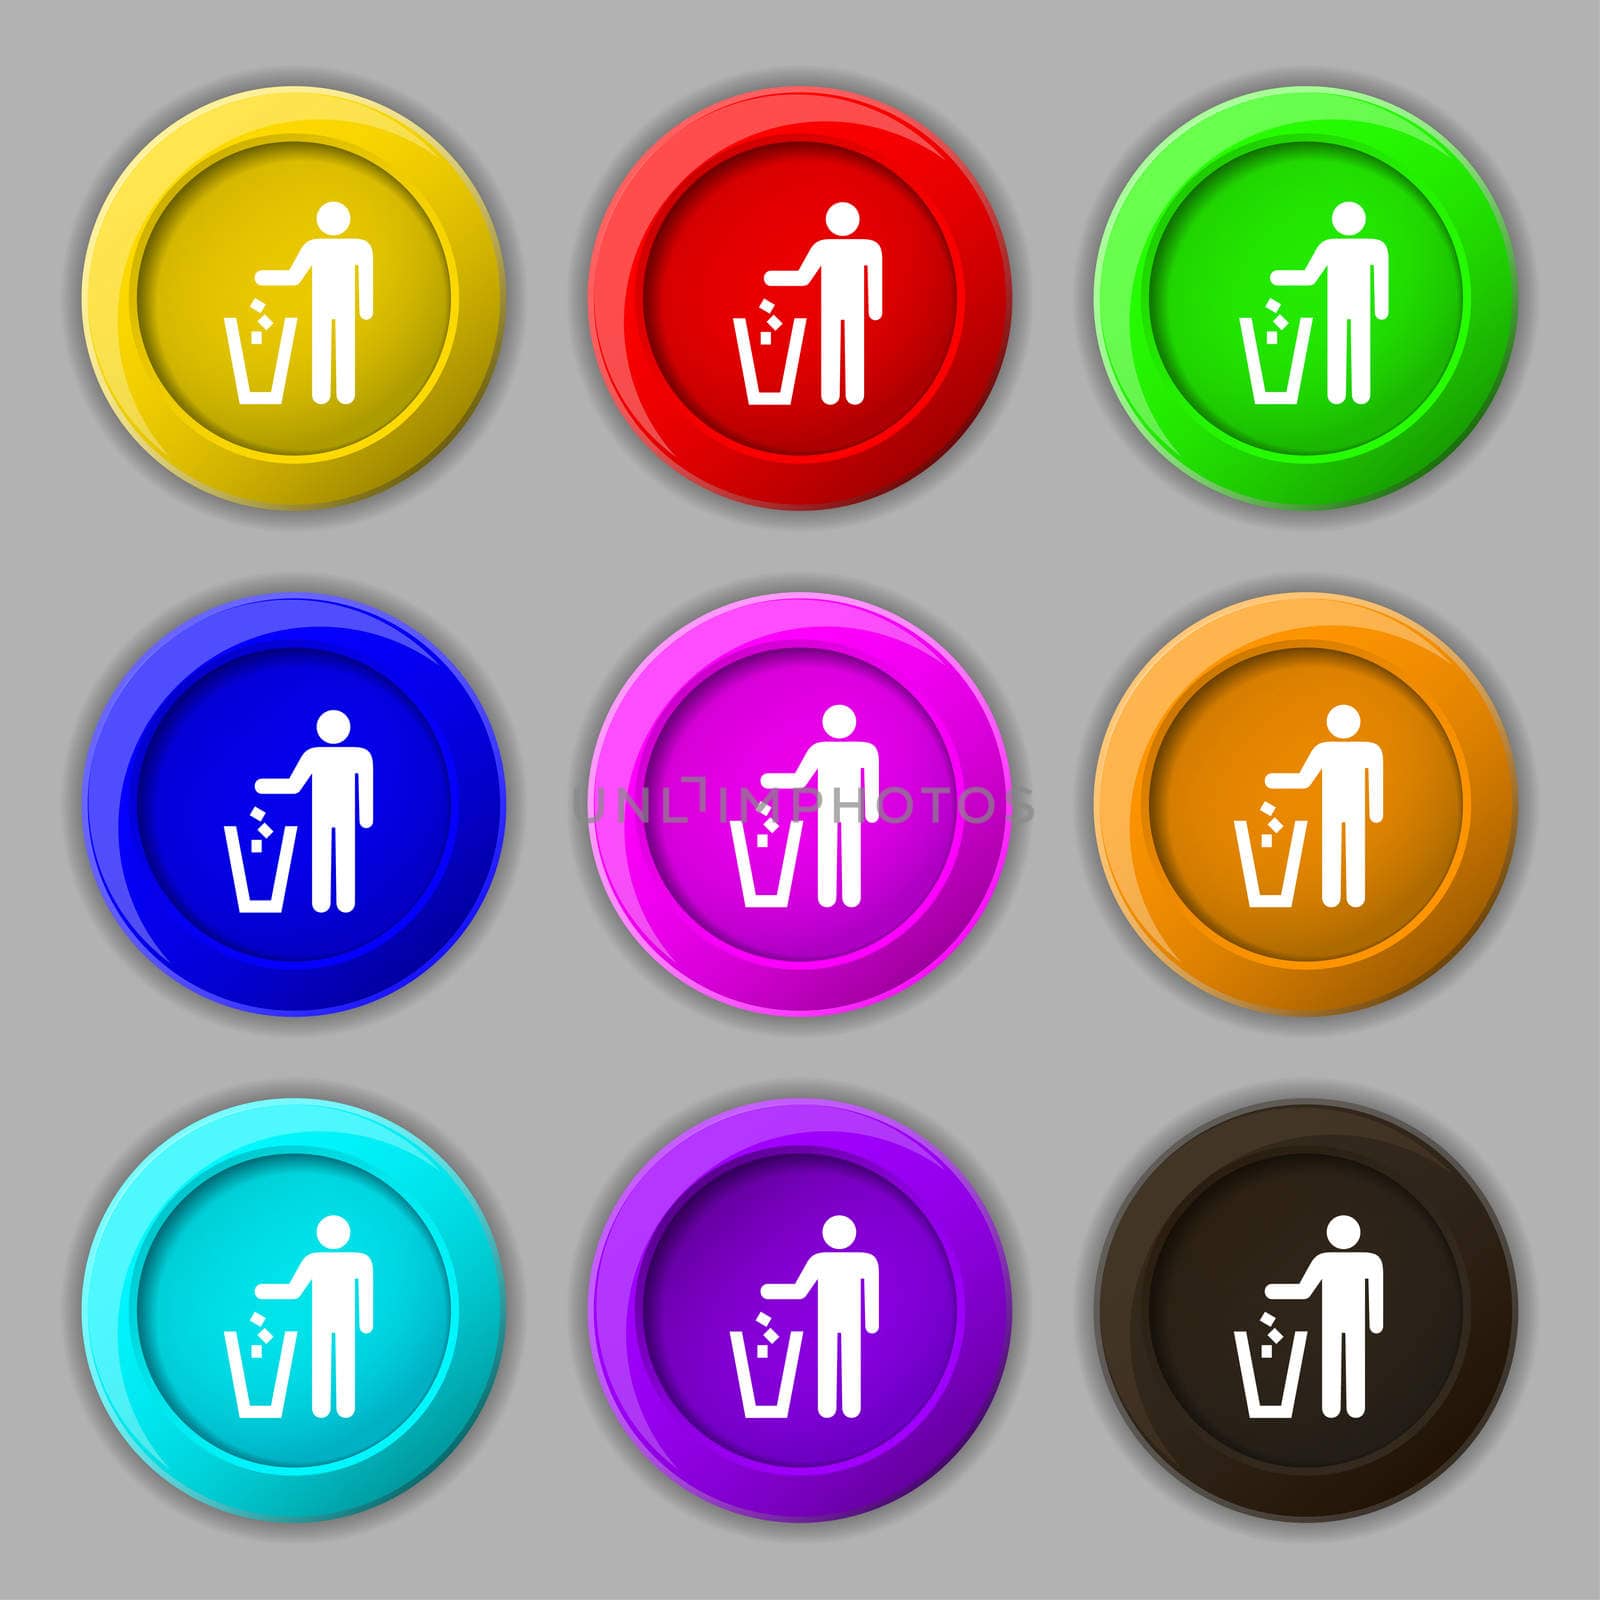 throw away the trash icon sign. symbol on nine round colourful buttons. illustration